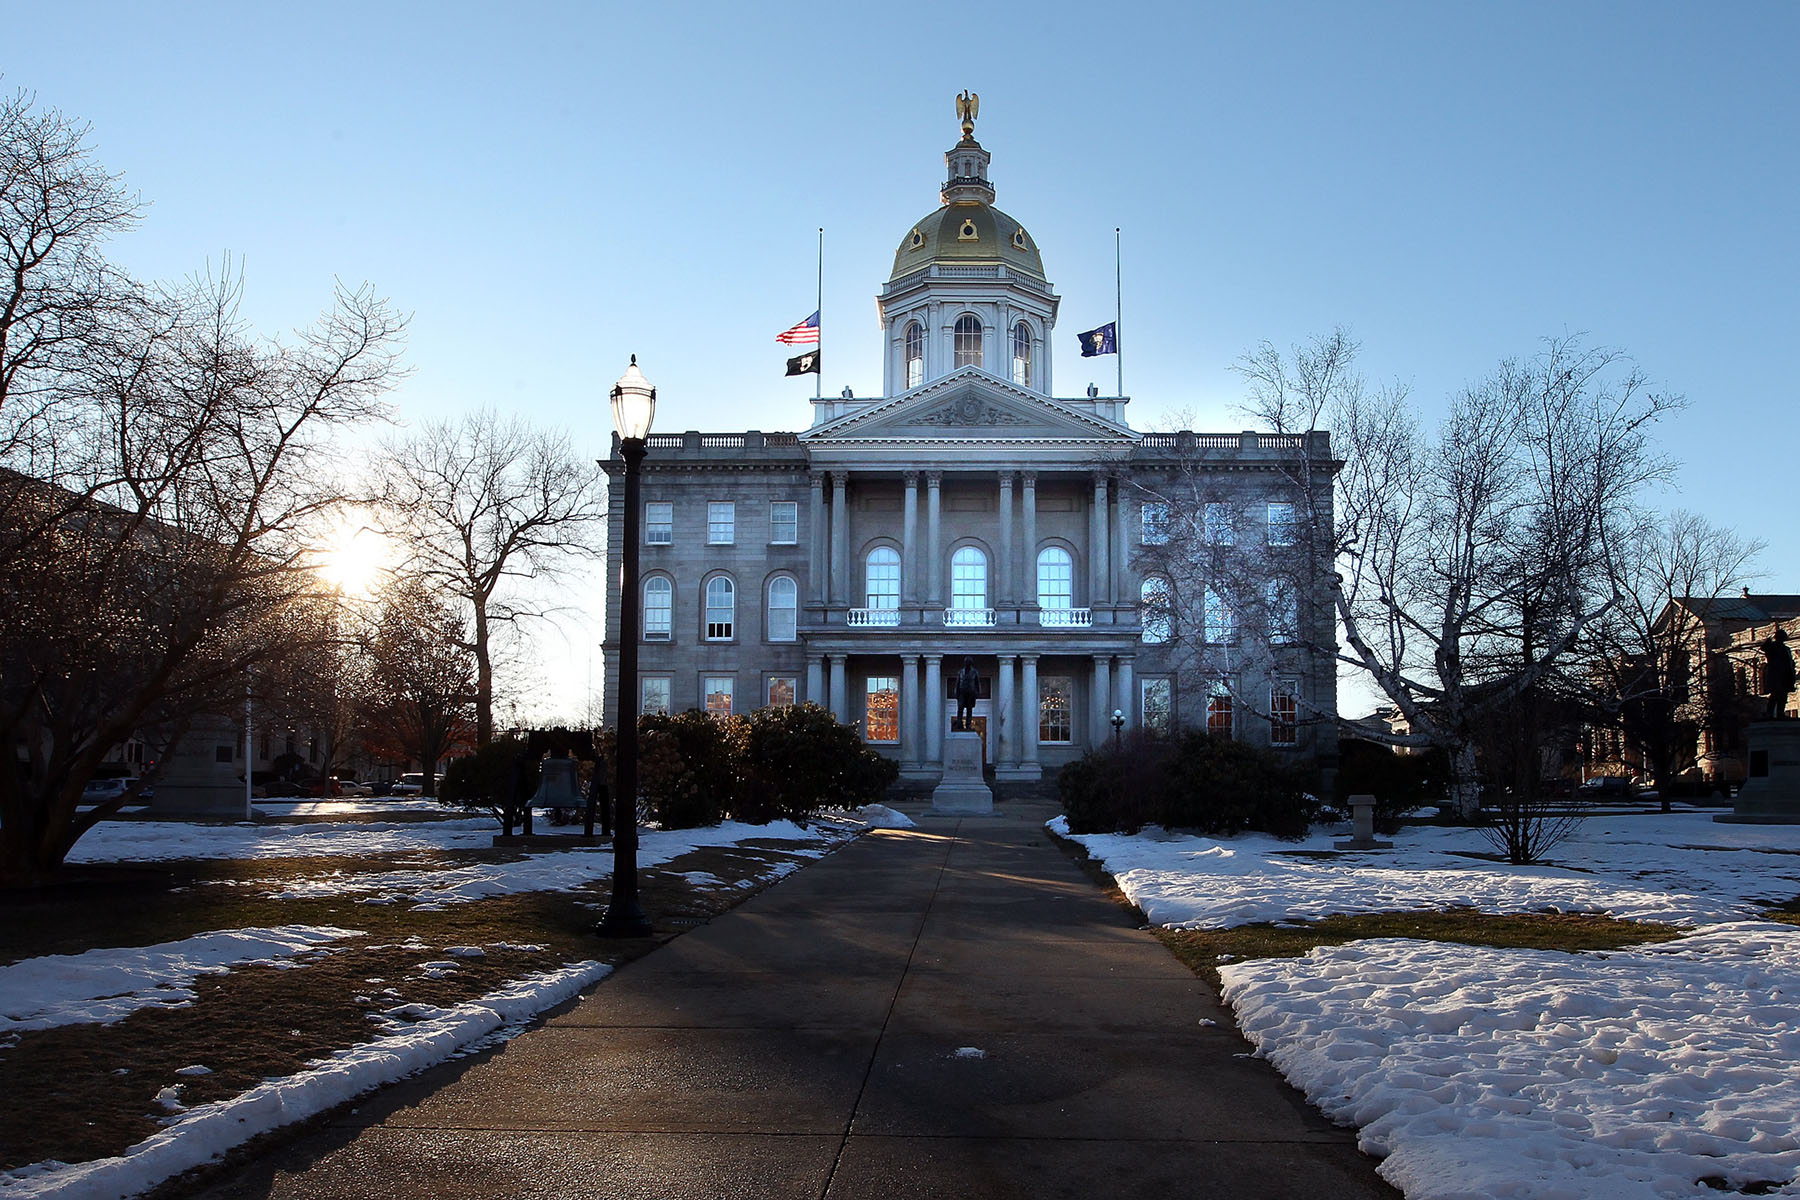 The New Hampshire Statehouse is seen in Concord, New Hampshire